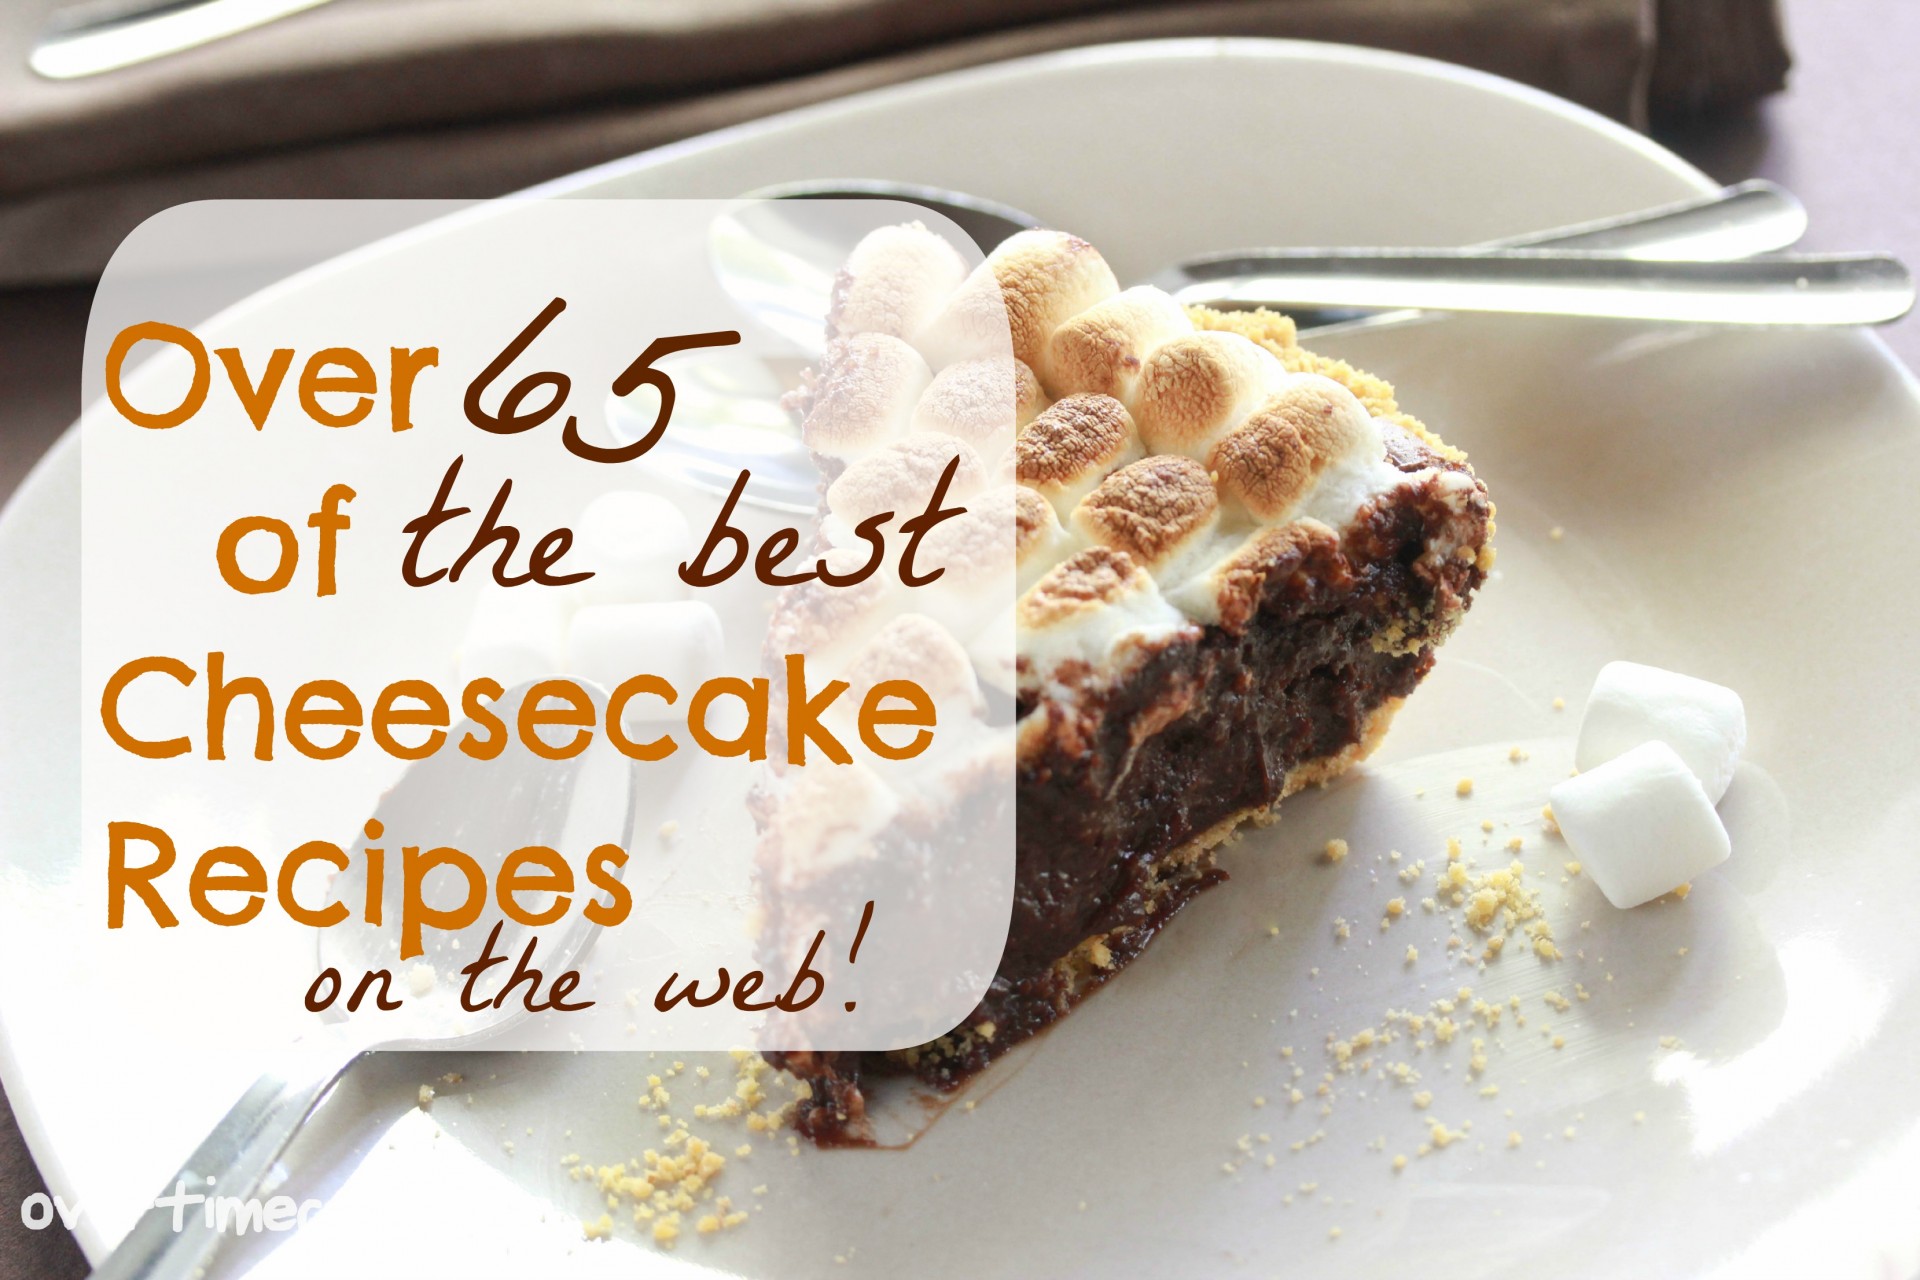 over 65 of the best cheesecake recipes on the web on Overtimecook.com